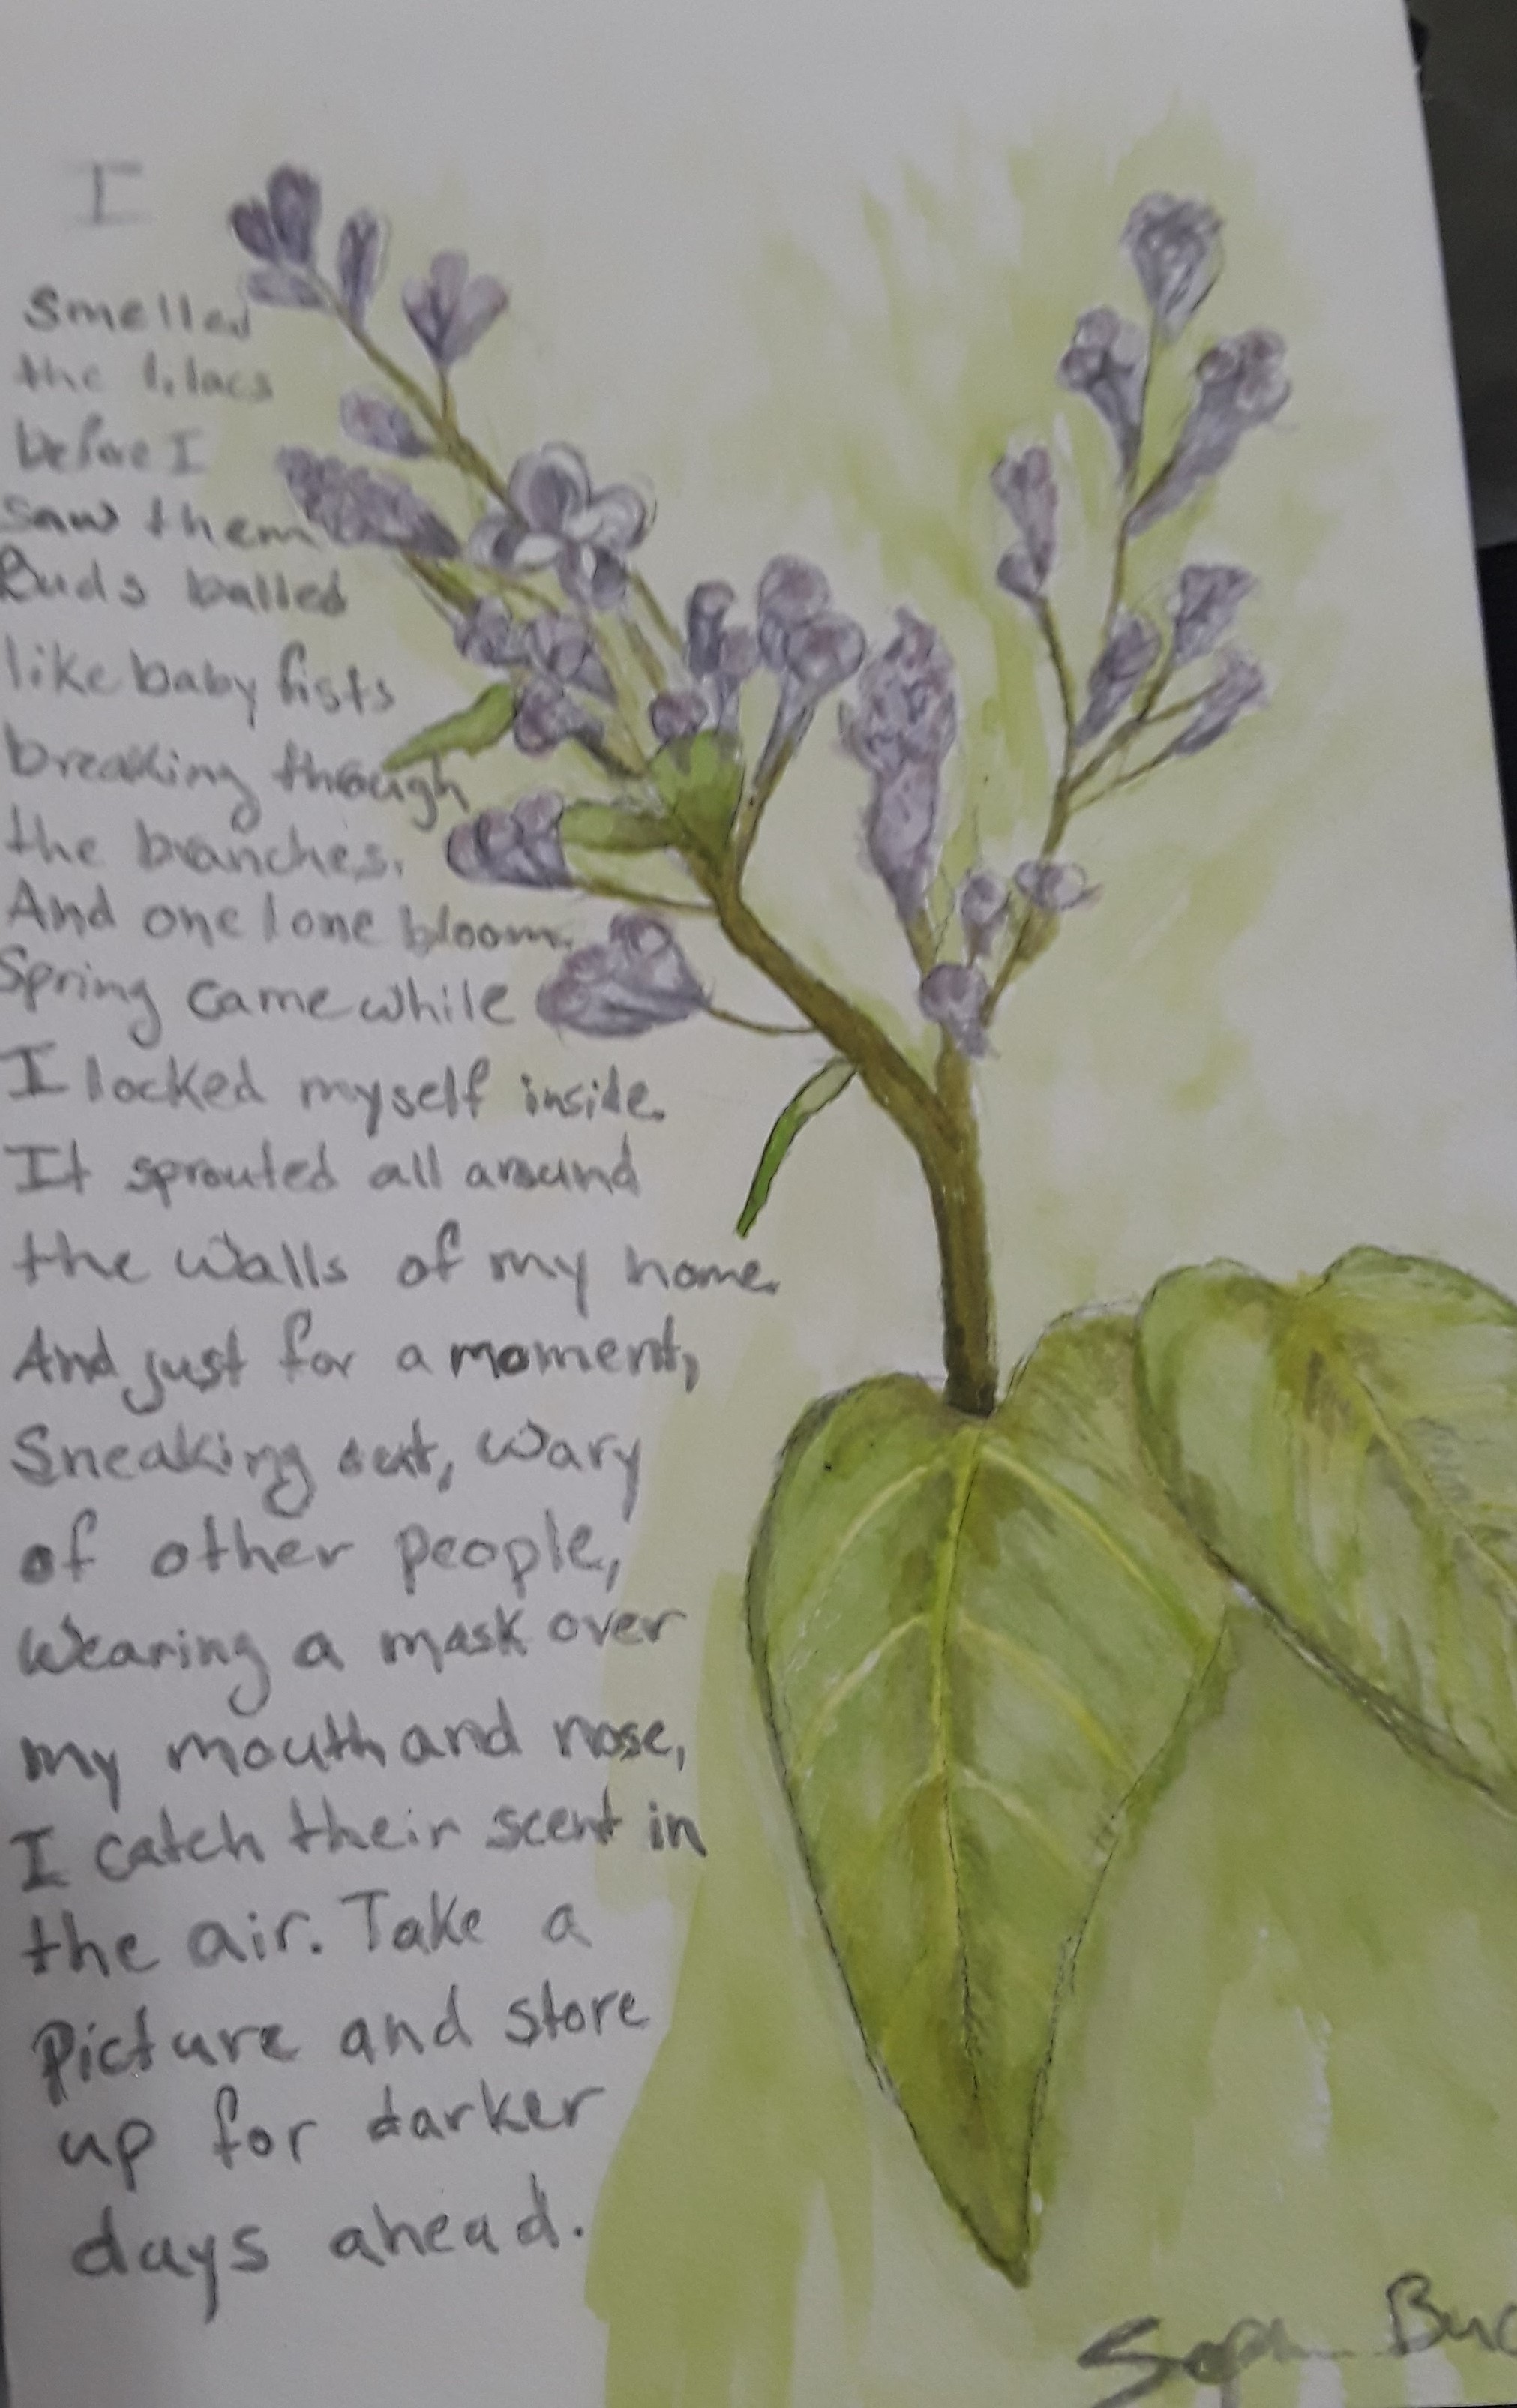 A watercolor painting of a lilac branch with many buds and one bloom. On the same sheet of paper, the poem is written by hand. I smelled/the lilacs/before I saw them/buds/balled like baby fists/breaking/outamong the branches./And one lone bloom./Spring came while I locked myself inside./It sprouted all around/the walls of my home./And just for a moment,/sneaking out, wary of people/with a mask covering my/mouth and nose, I catch/their scent in the air./Take a picture/And store up for darker days.